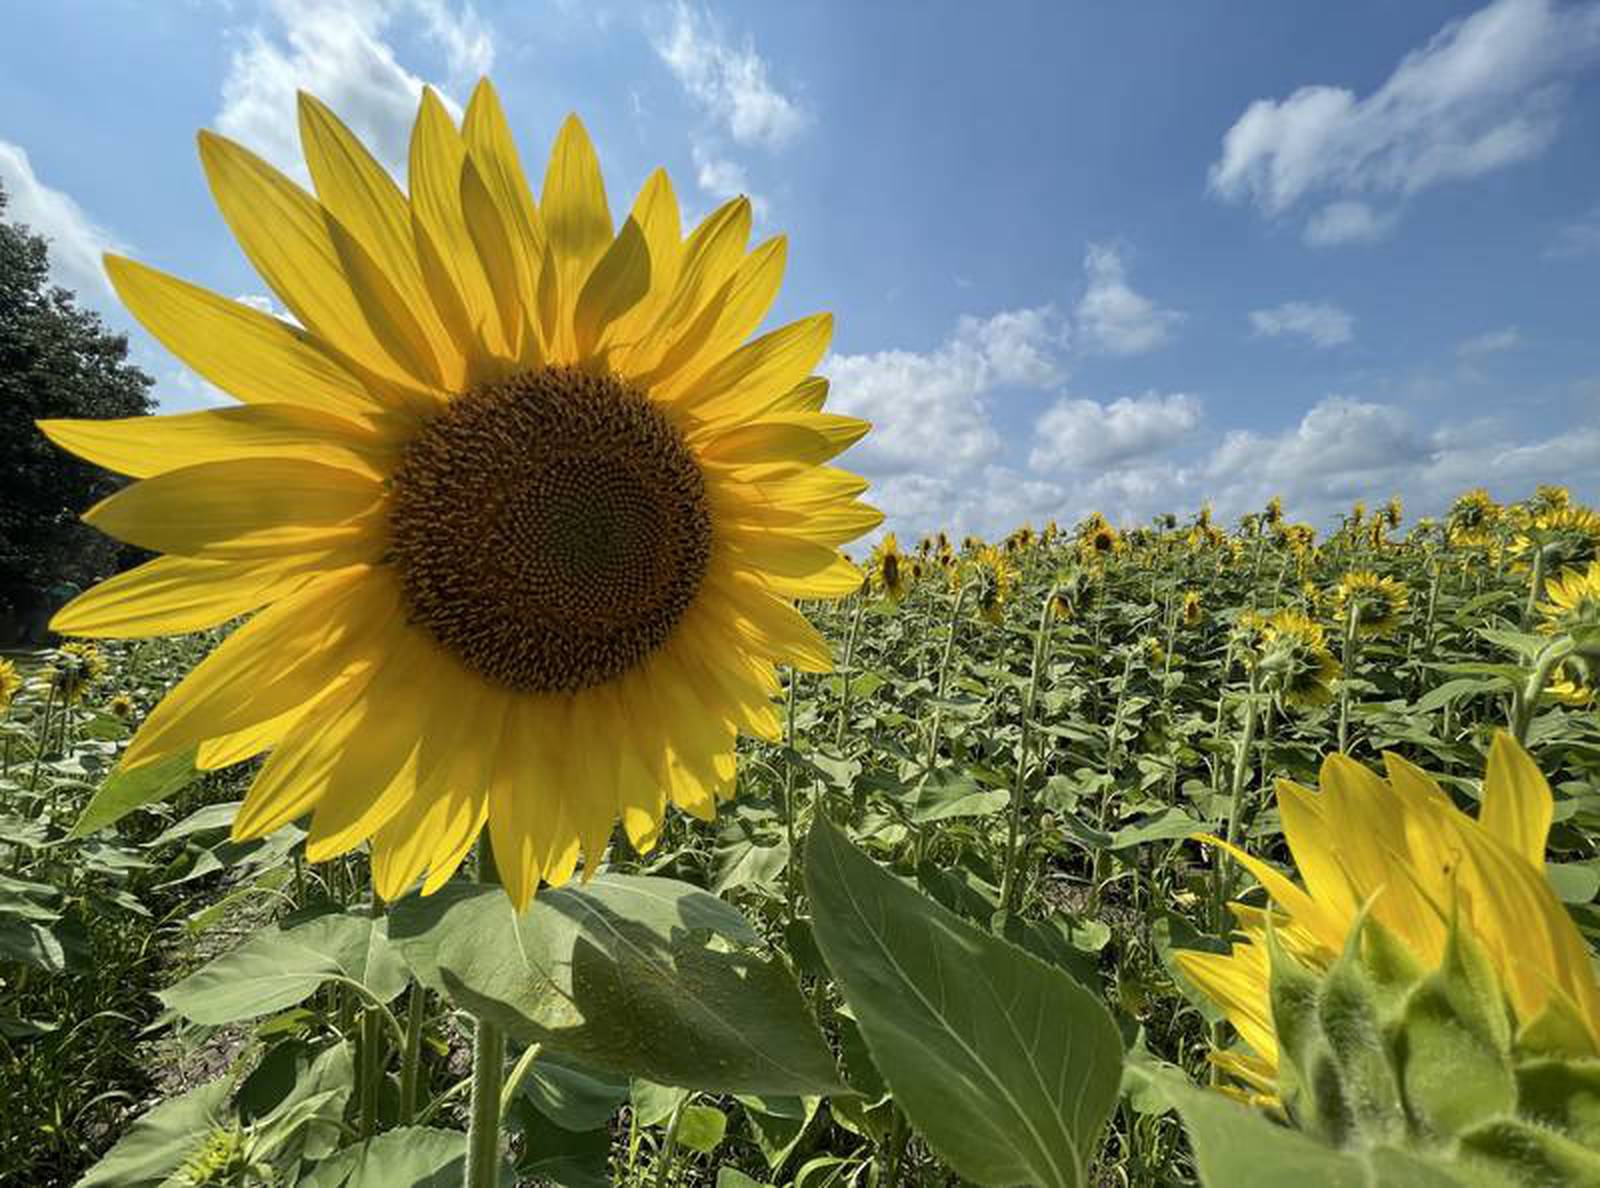 Visitors flock to view vast field of sunflowers Starved Rock Country